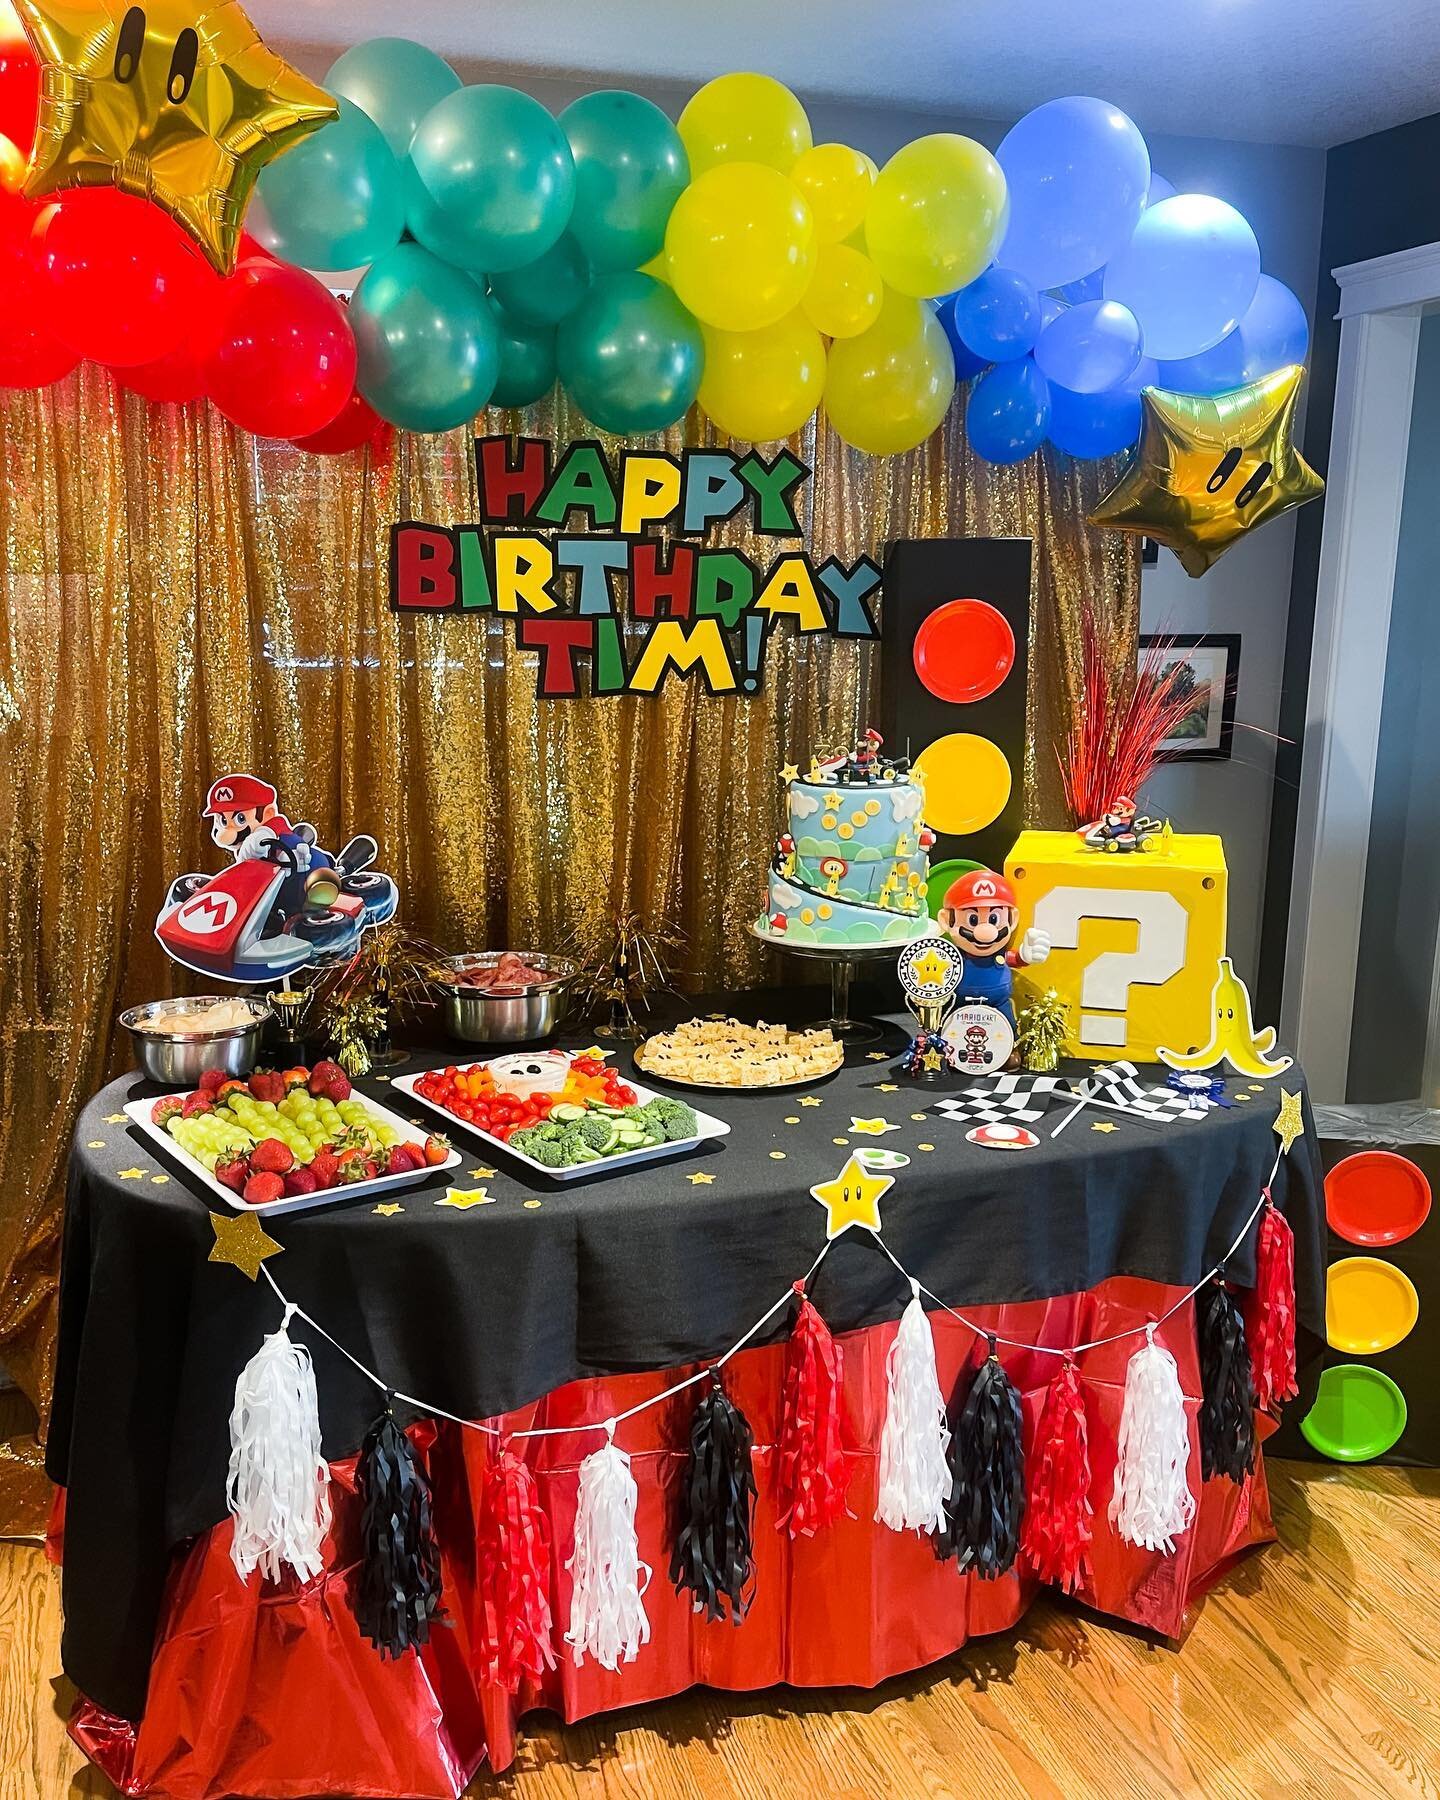 Mario Kart Party! 🎉

Our clients have such great theme ideas and we love being apart of bringing them to life. Our client @kimberlyjane12 wanted to surprise her fianc&eacute; @t.kruch with a Mario Kart Tournament for his birthday! We had a blast des